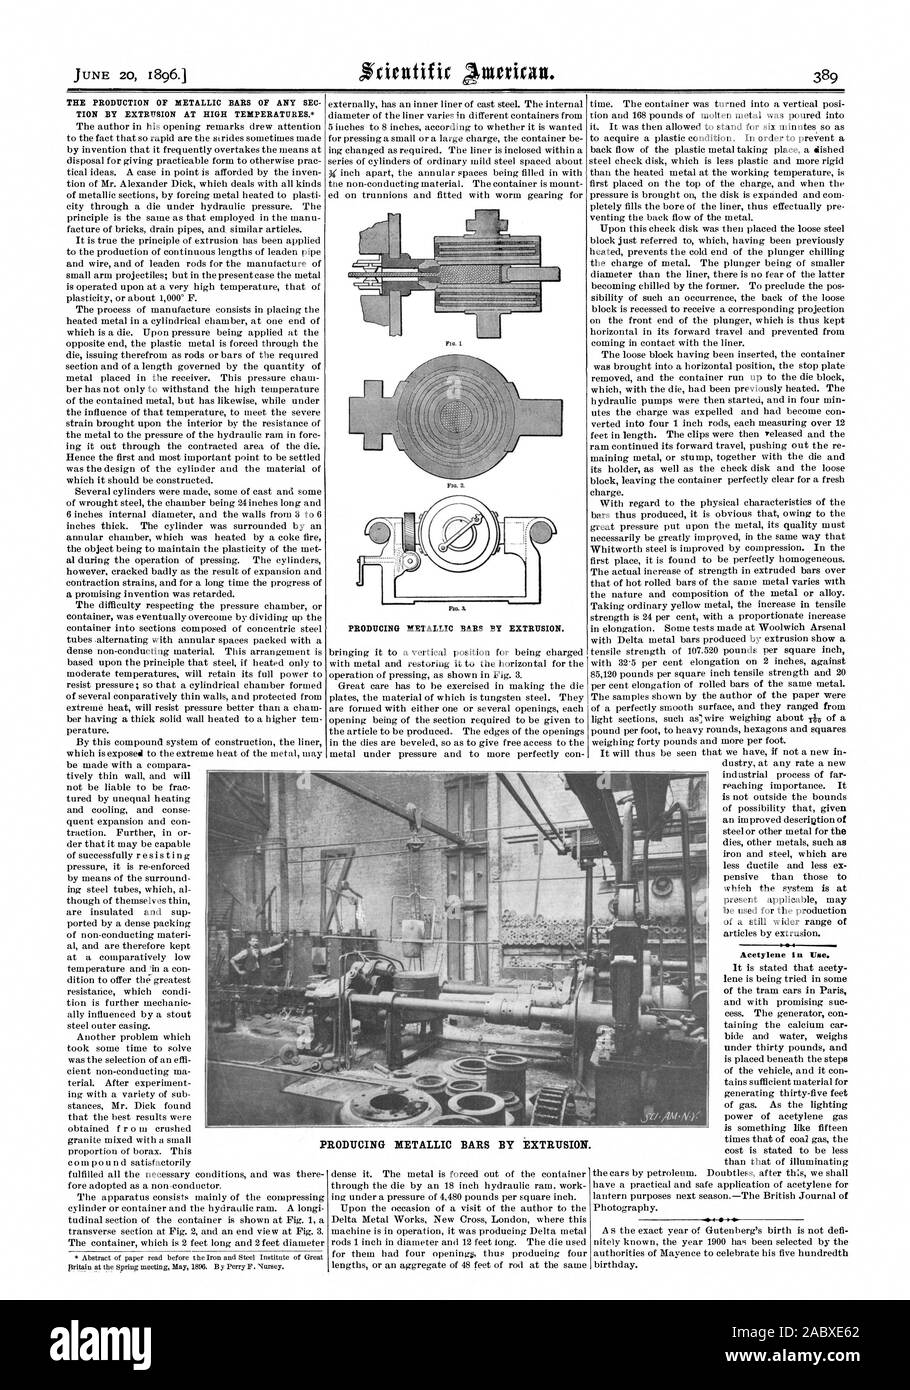 MINV.M Oli THE PRODUCTION OF METALLIC BARS OF ANY SEC TION BY EXTRUSION AT HIGH TEMPERATURES. PRODUCING METALLIC BARS BY EXTRUSION. l 4 Acetylene in Vote. PRODUCING METALLIC BARS BY EXTRUSION., scientific american, 1896-06-20 Stock Photo